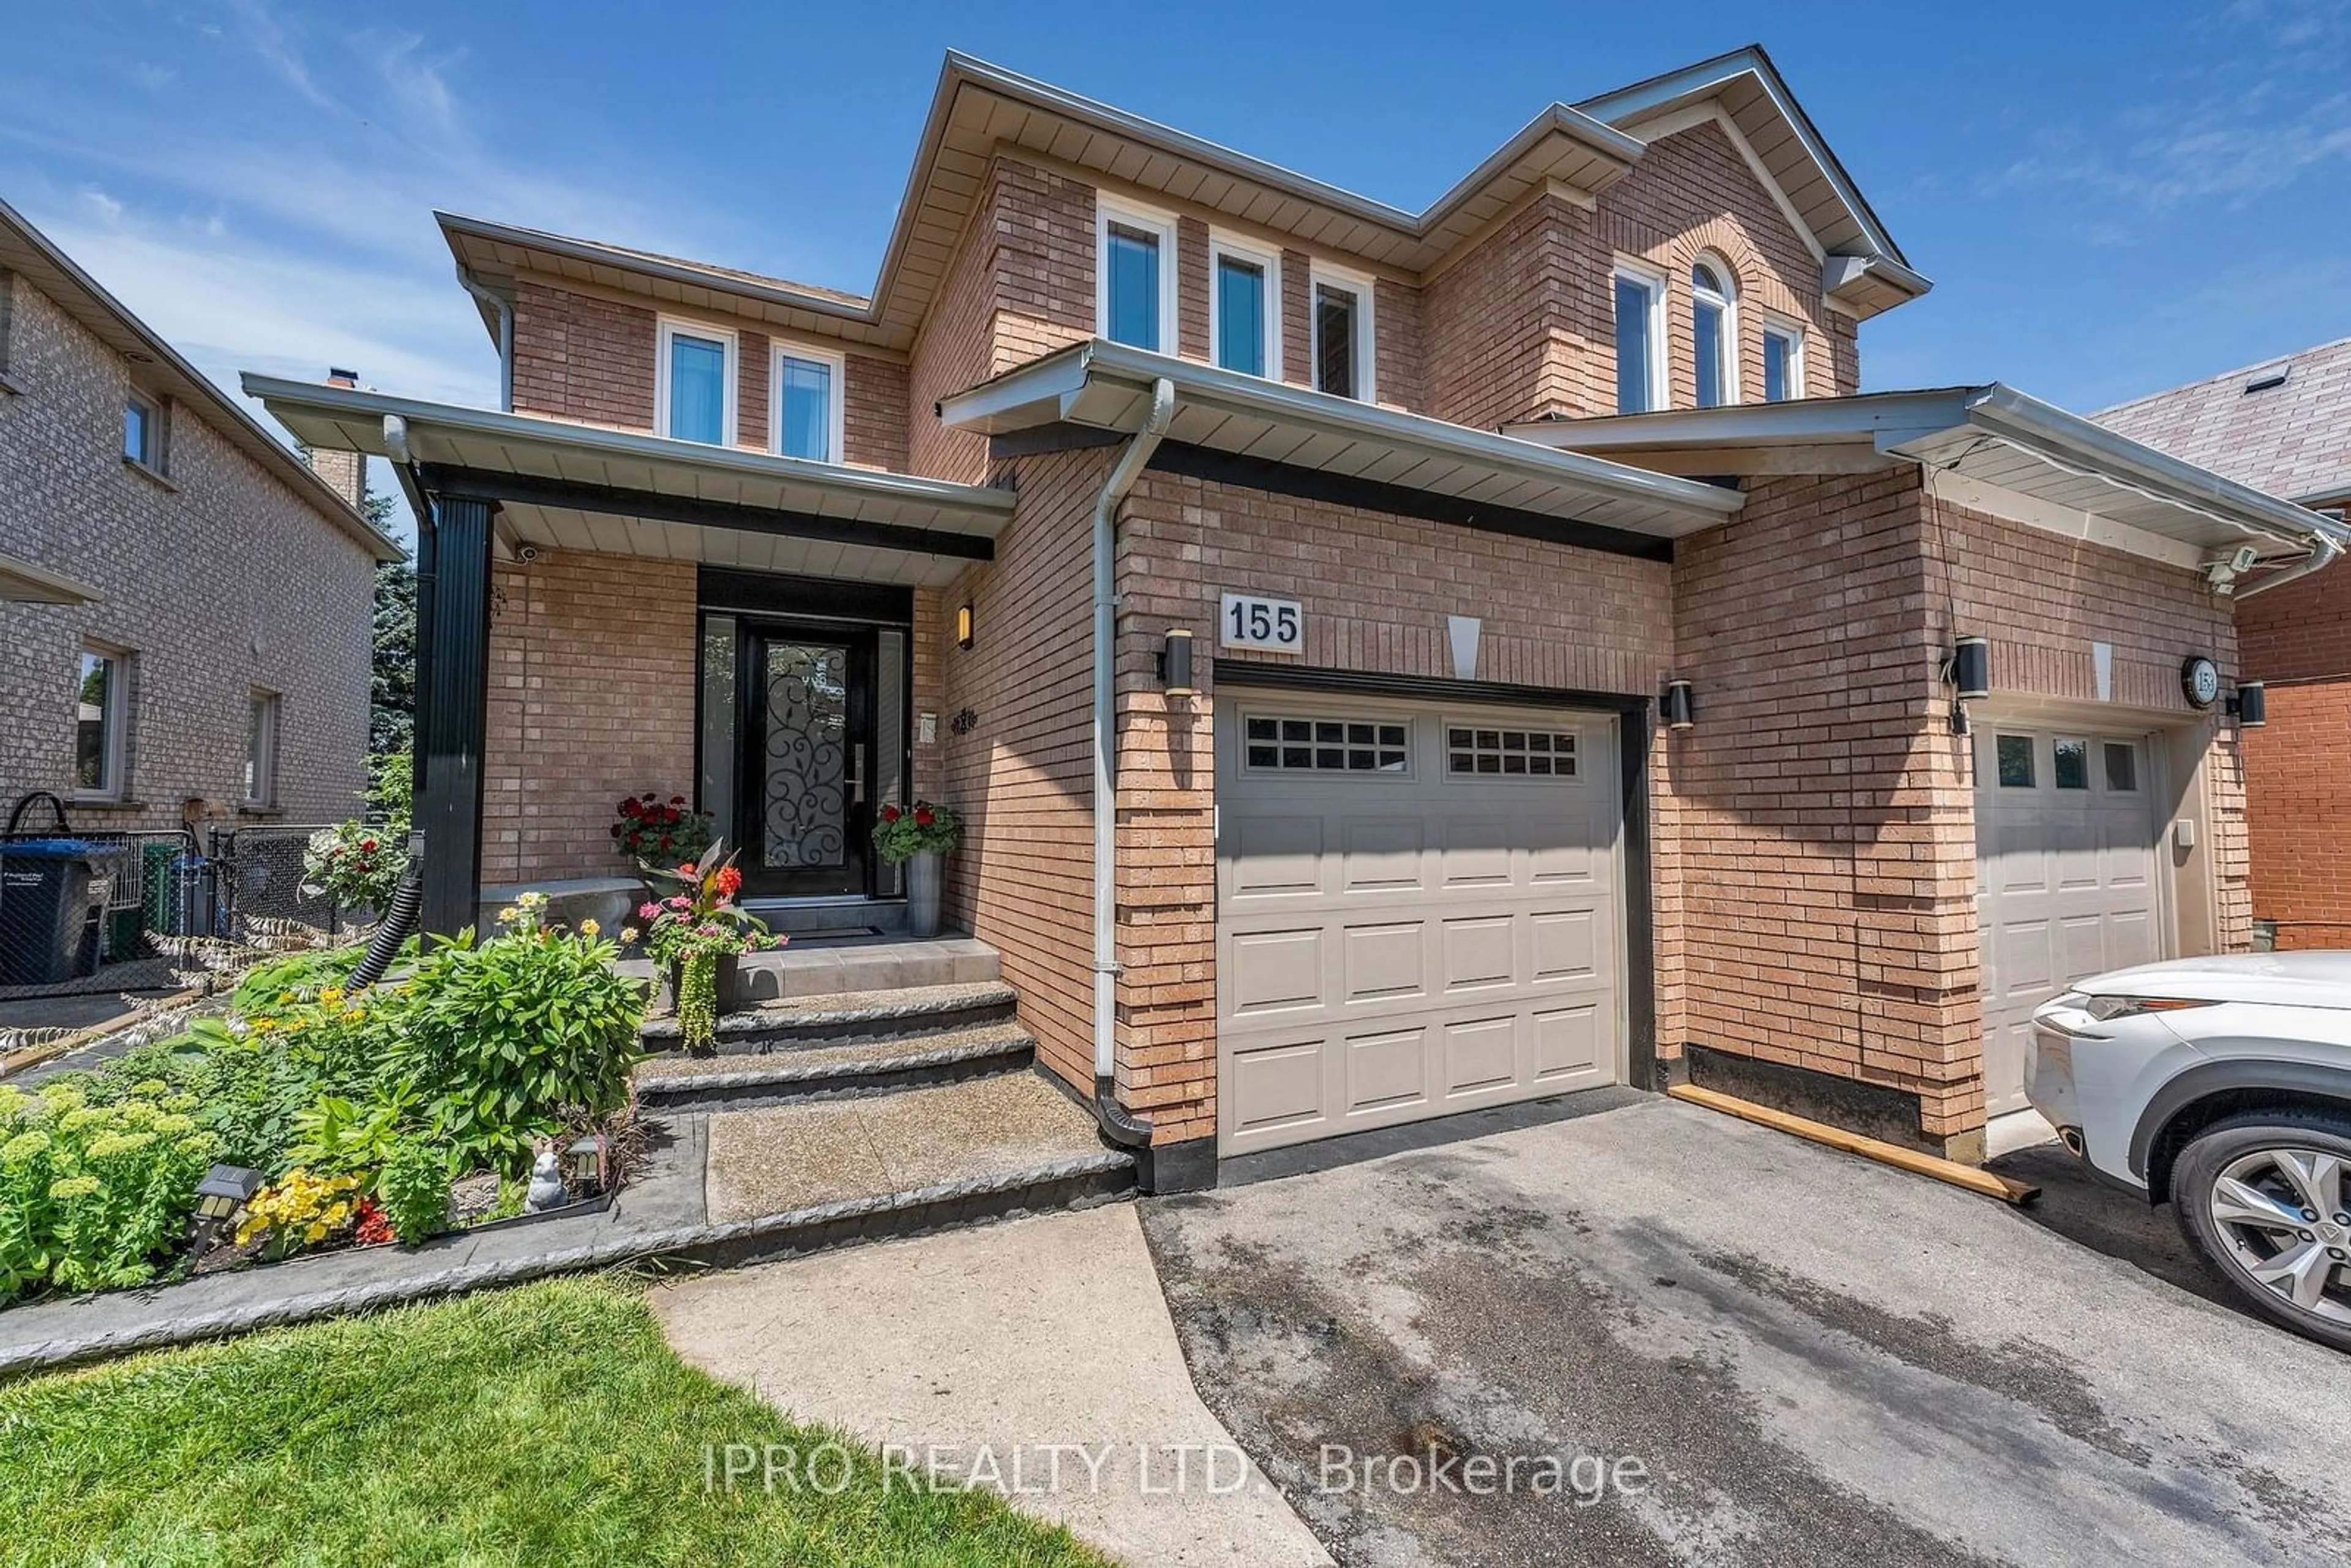 Home with brick exterior material for 155 Bighorn Cres, Brampton Ontario L6R 1G1